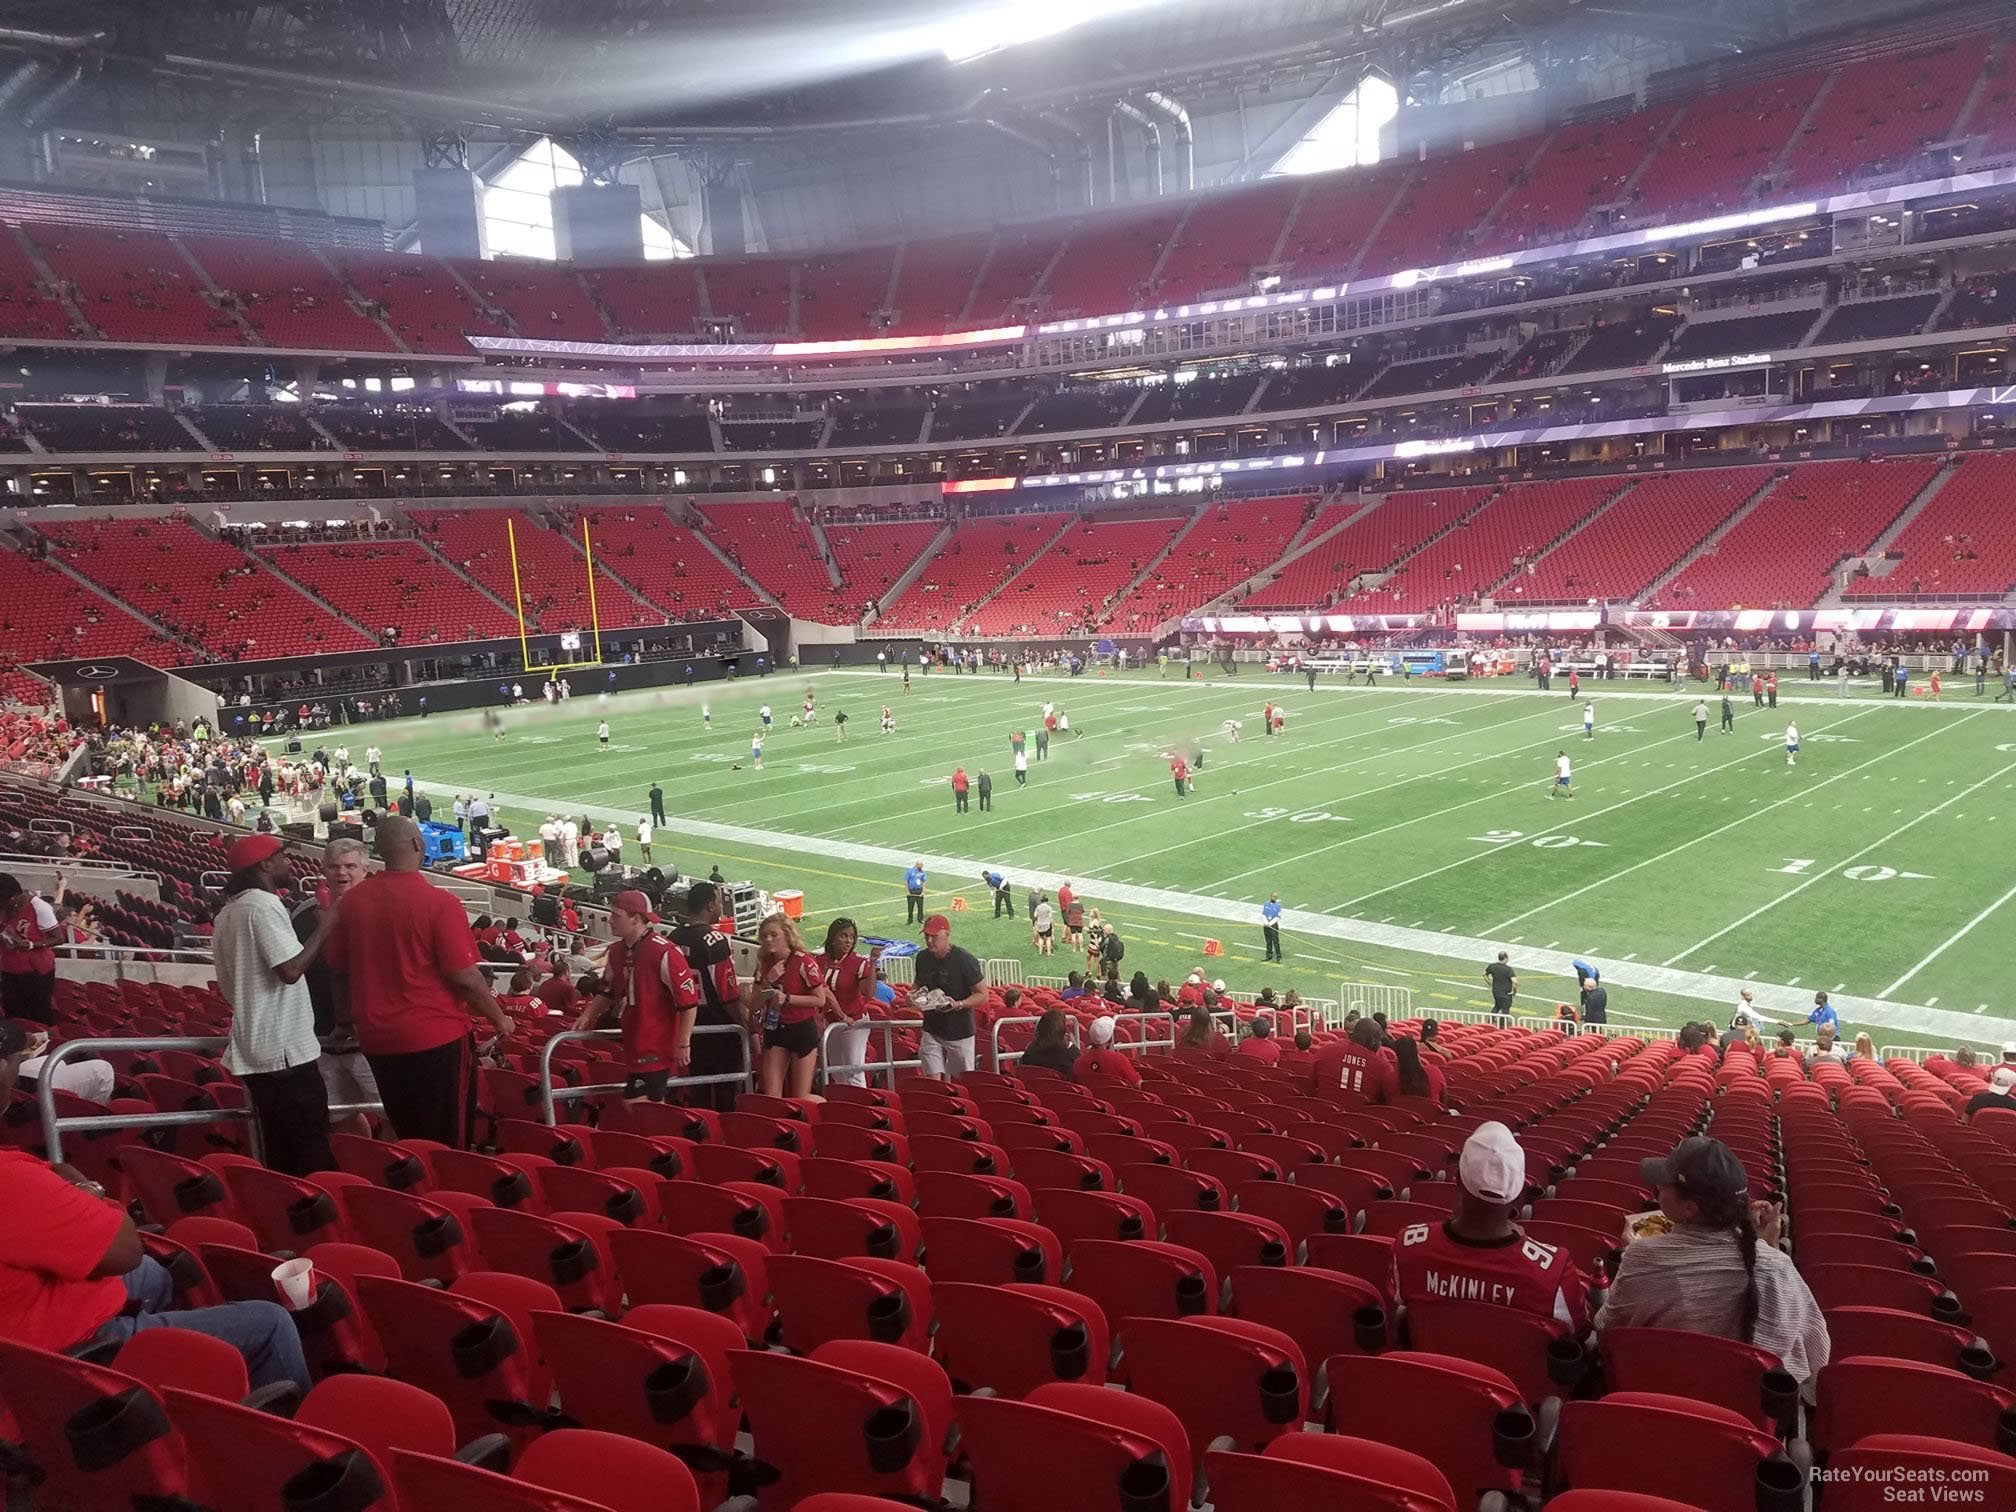 section 106, row 32 seat view  for football - mercedes-benz stadium